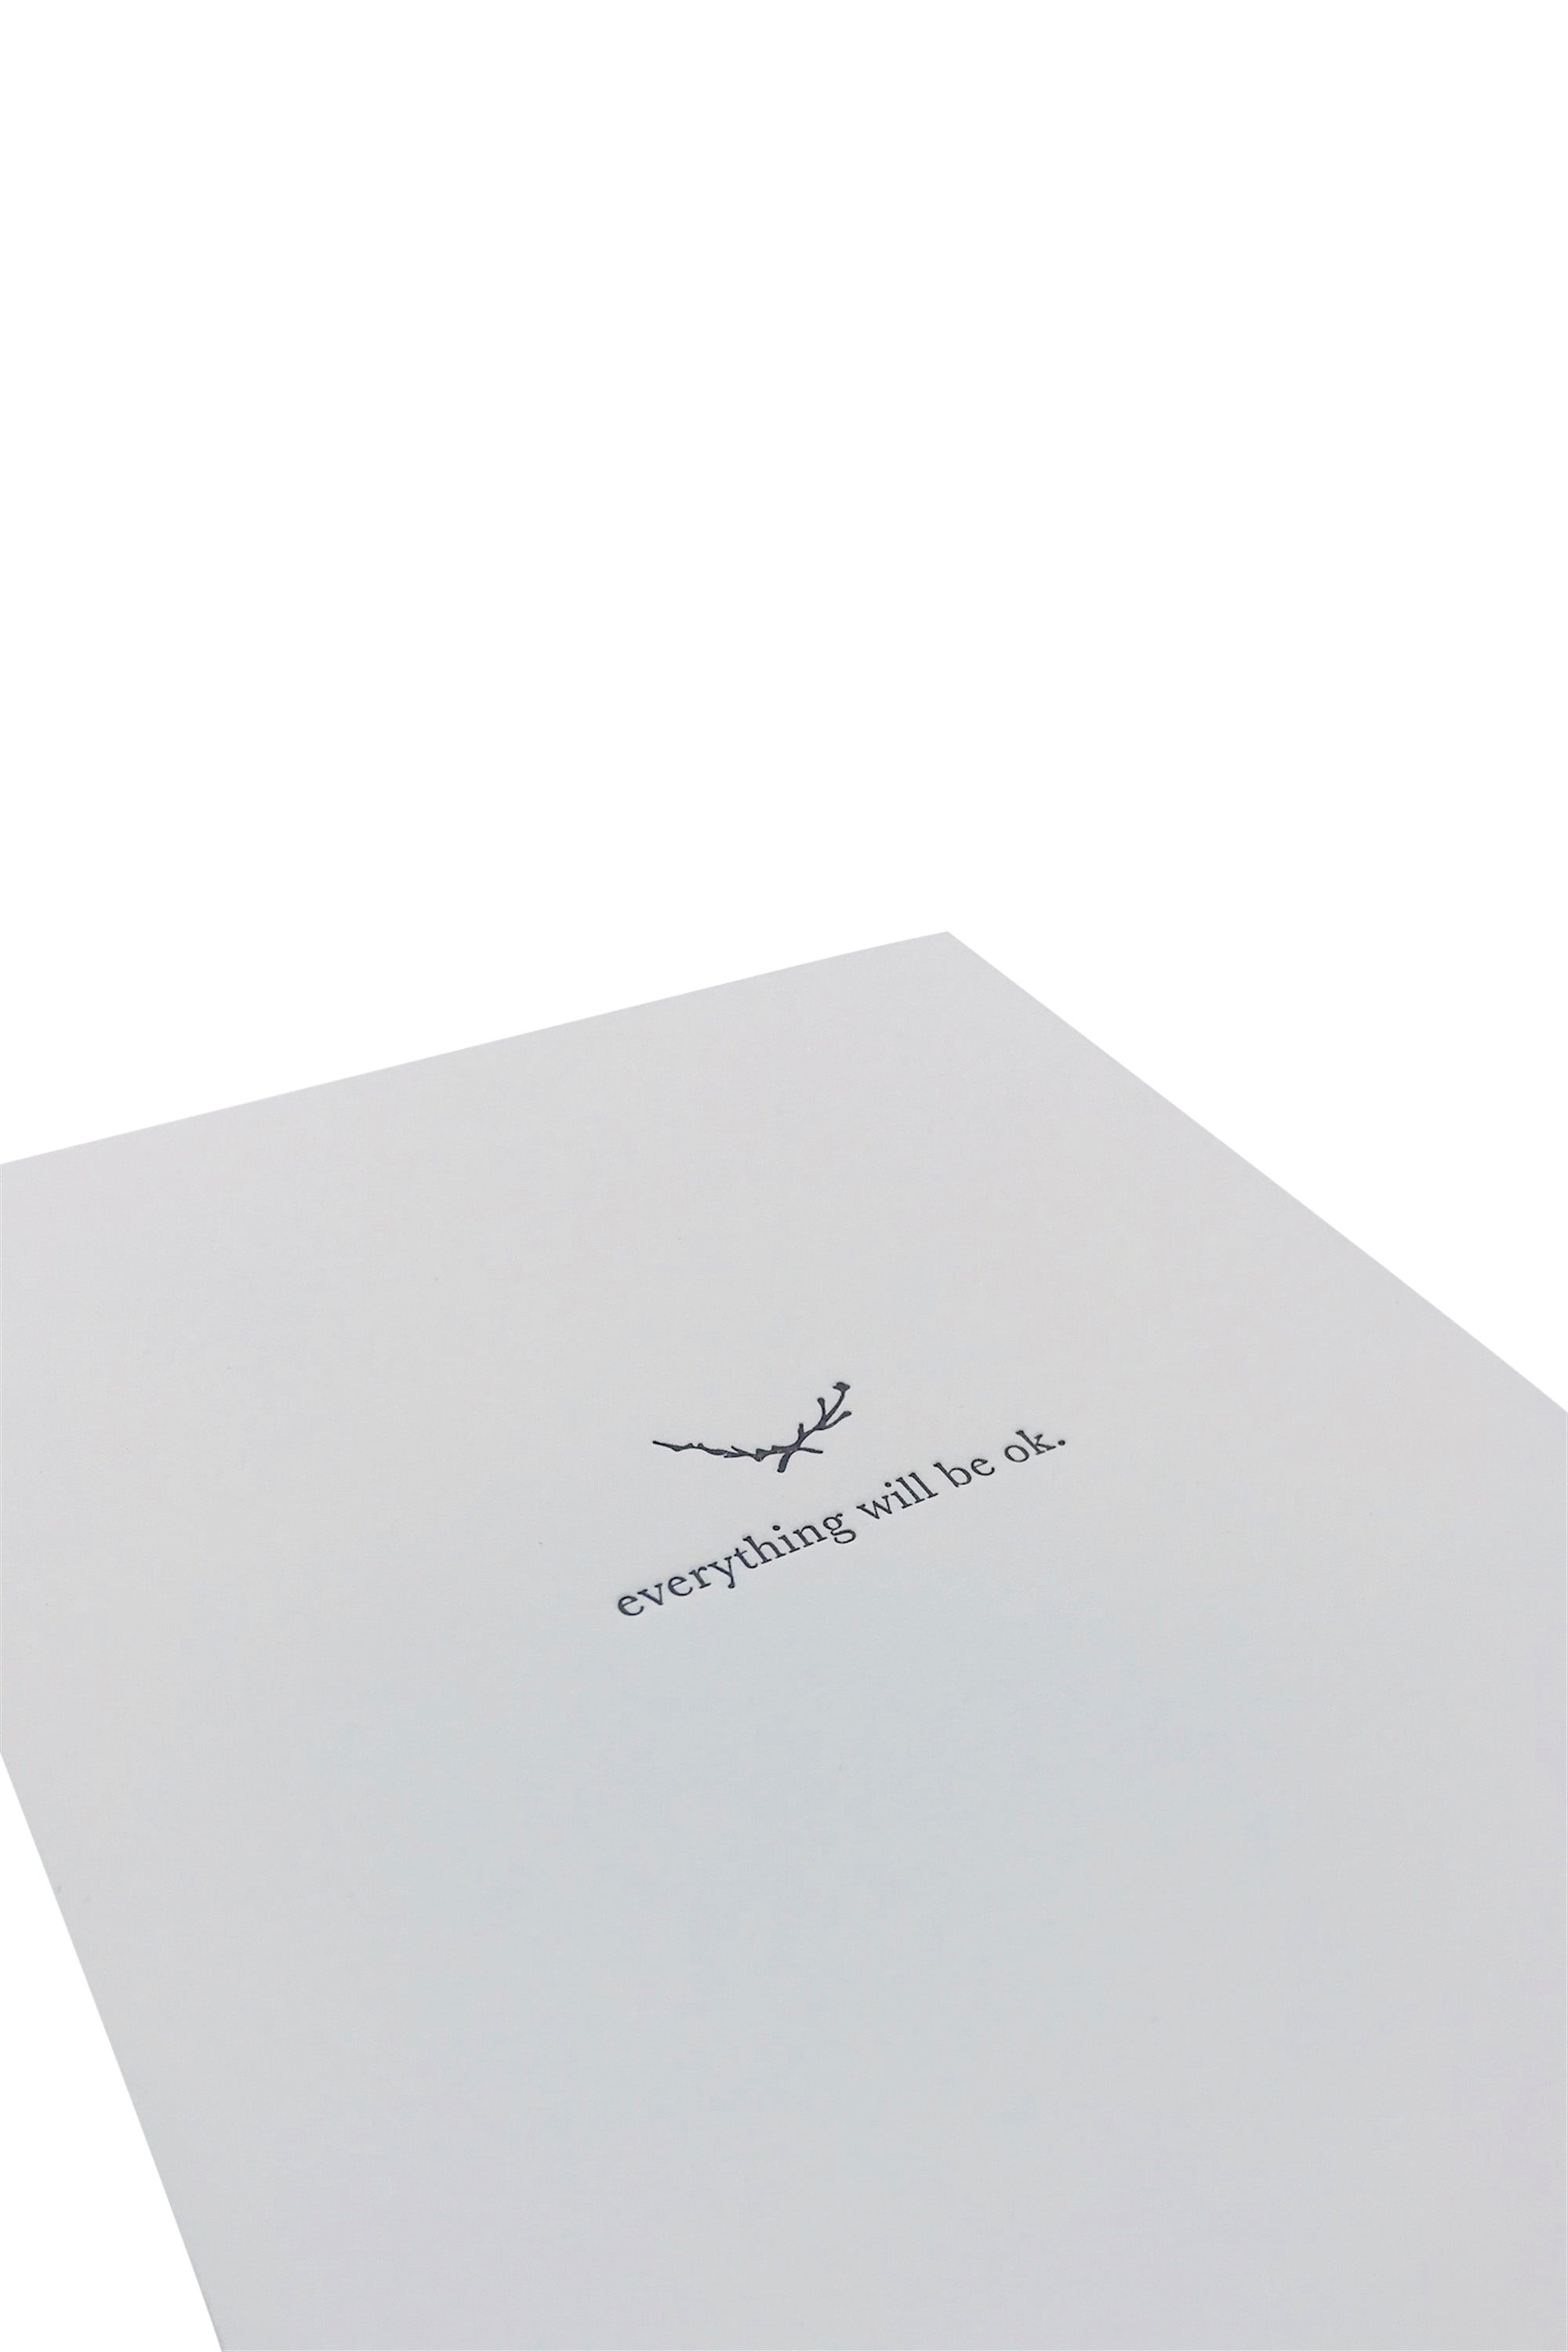 HomArt Everything Will Be OK Greeting Card